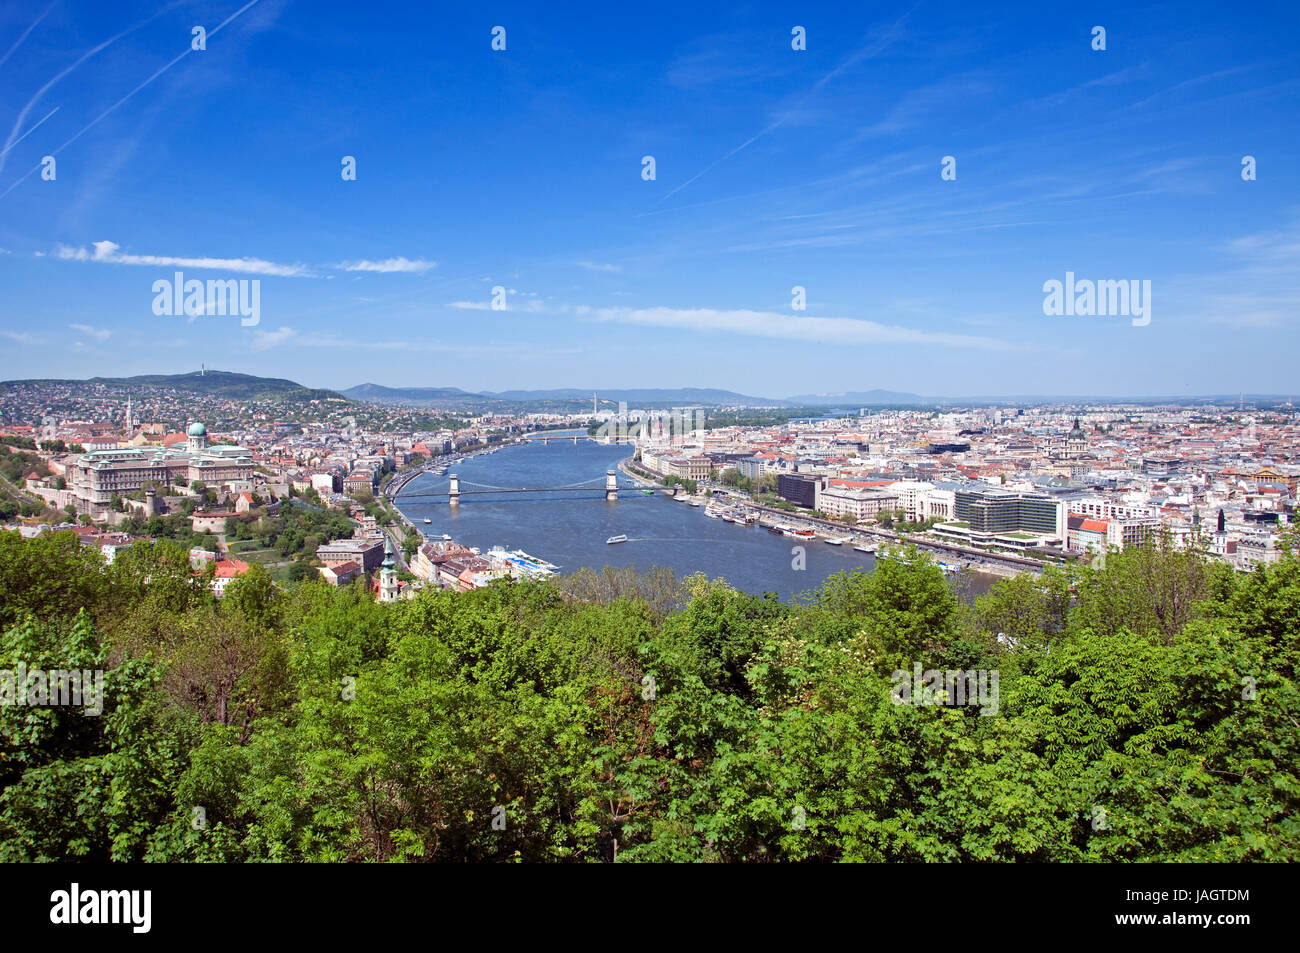 skyline of budapest and river danube in summer Stock Photo